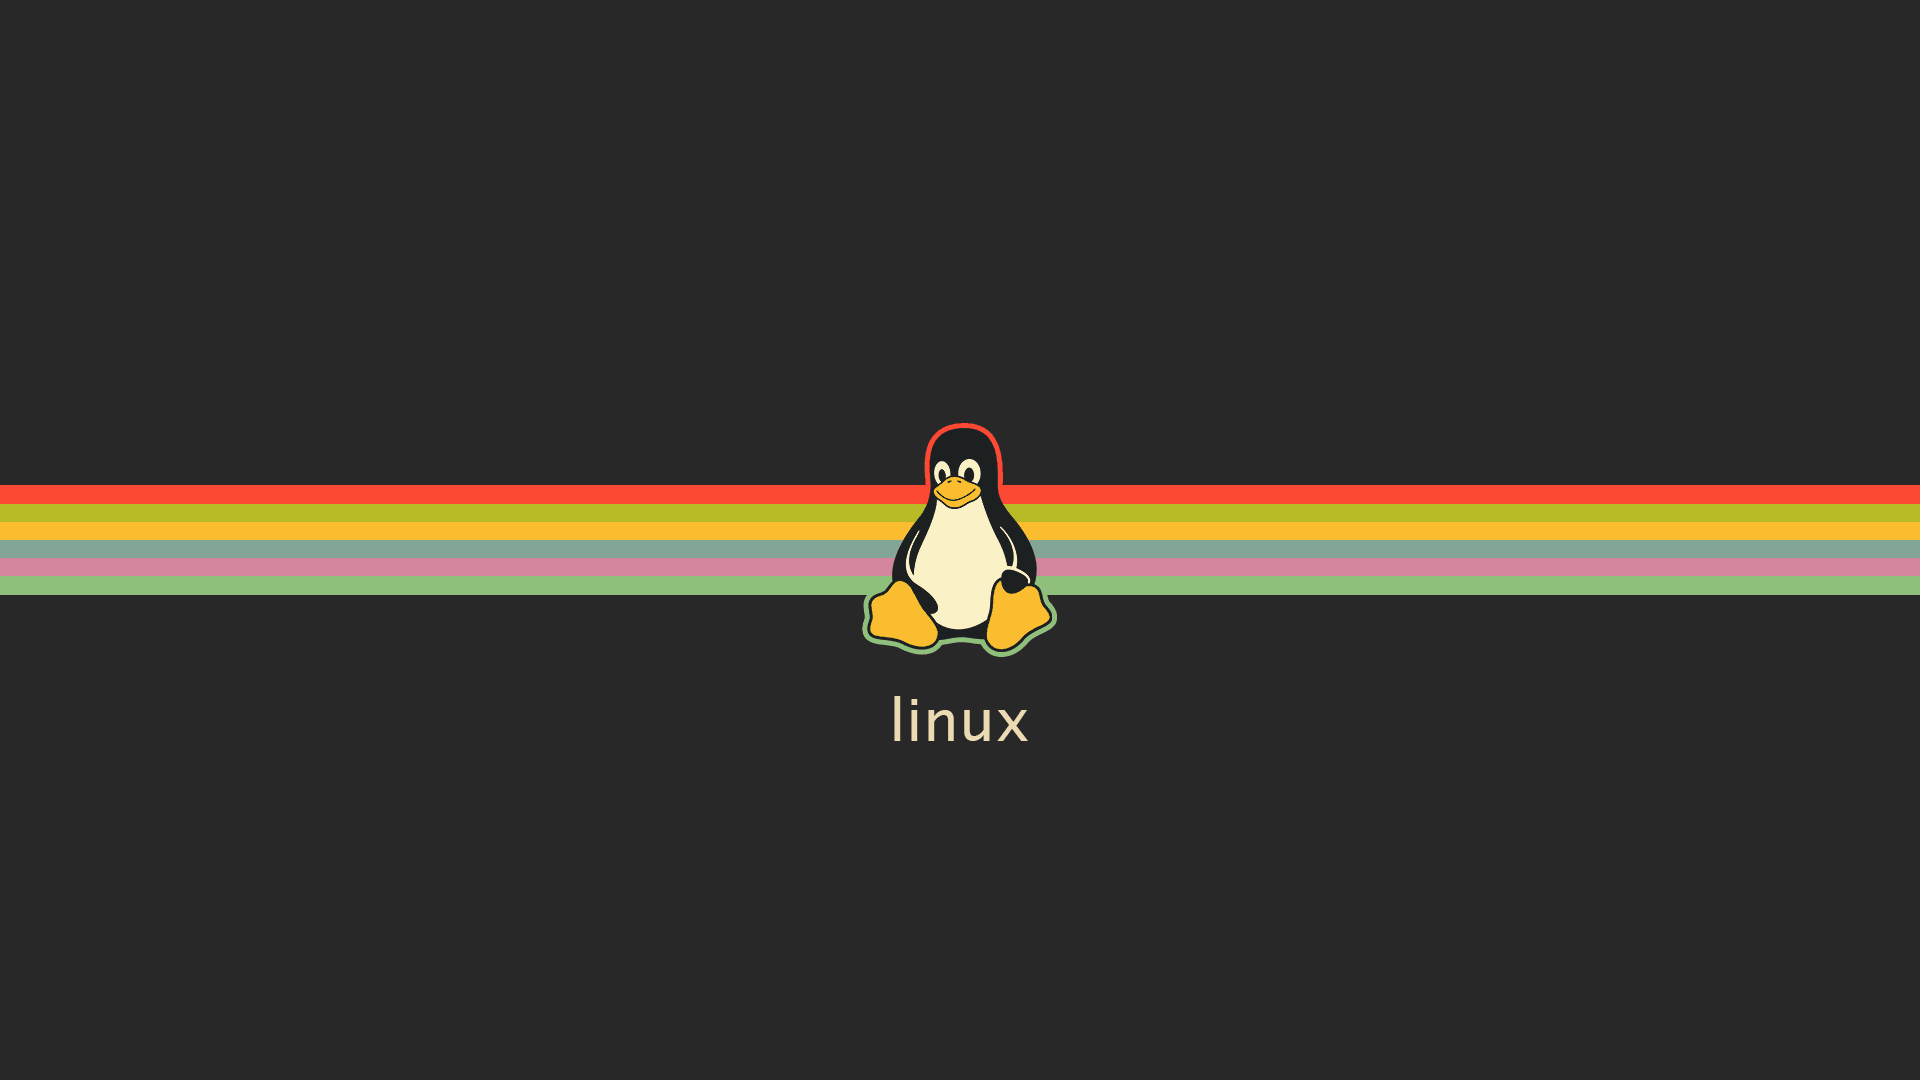 General 1920x1080 Linux Tux gruvbox stripes operating system simple background lines colorful digital art penguins minimalism animals